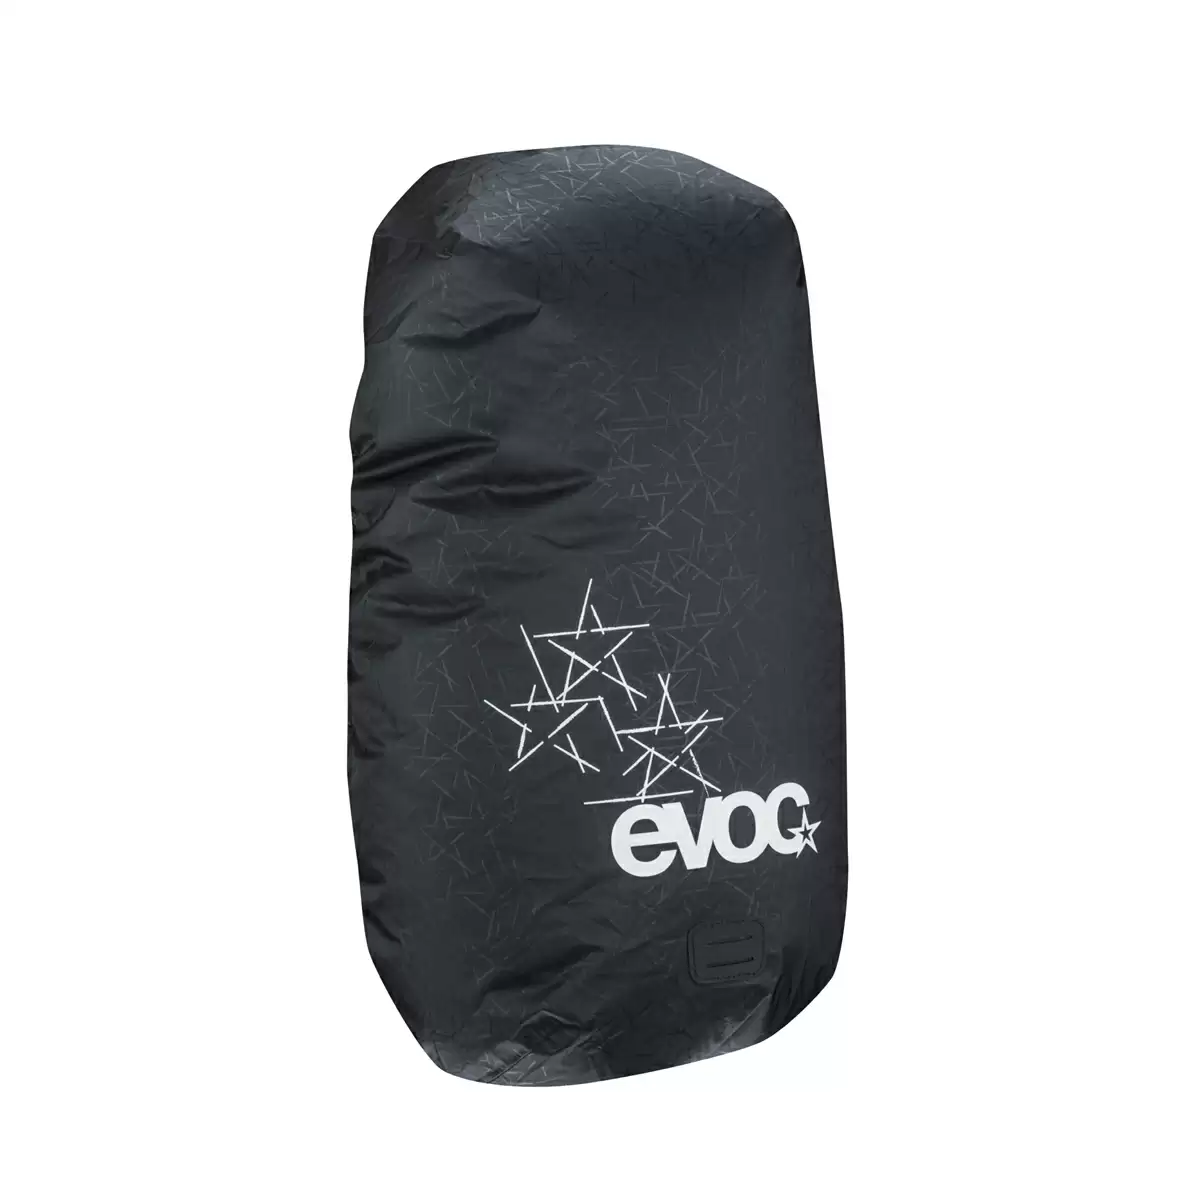 Raincover Sleeve black size M for backpacks from 25 to 40lt - image